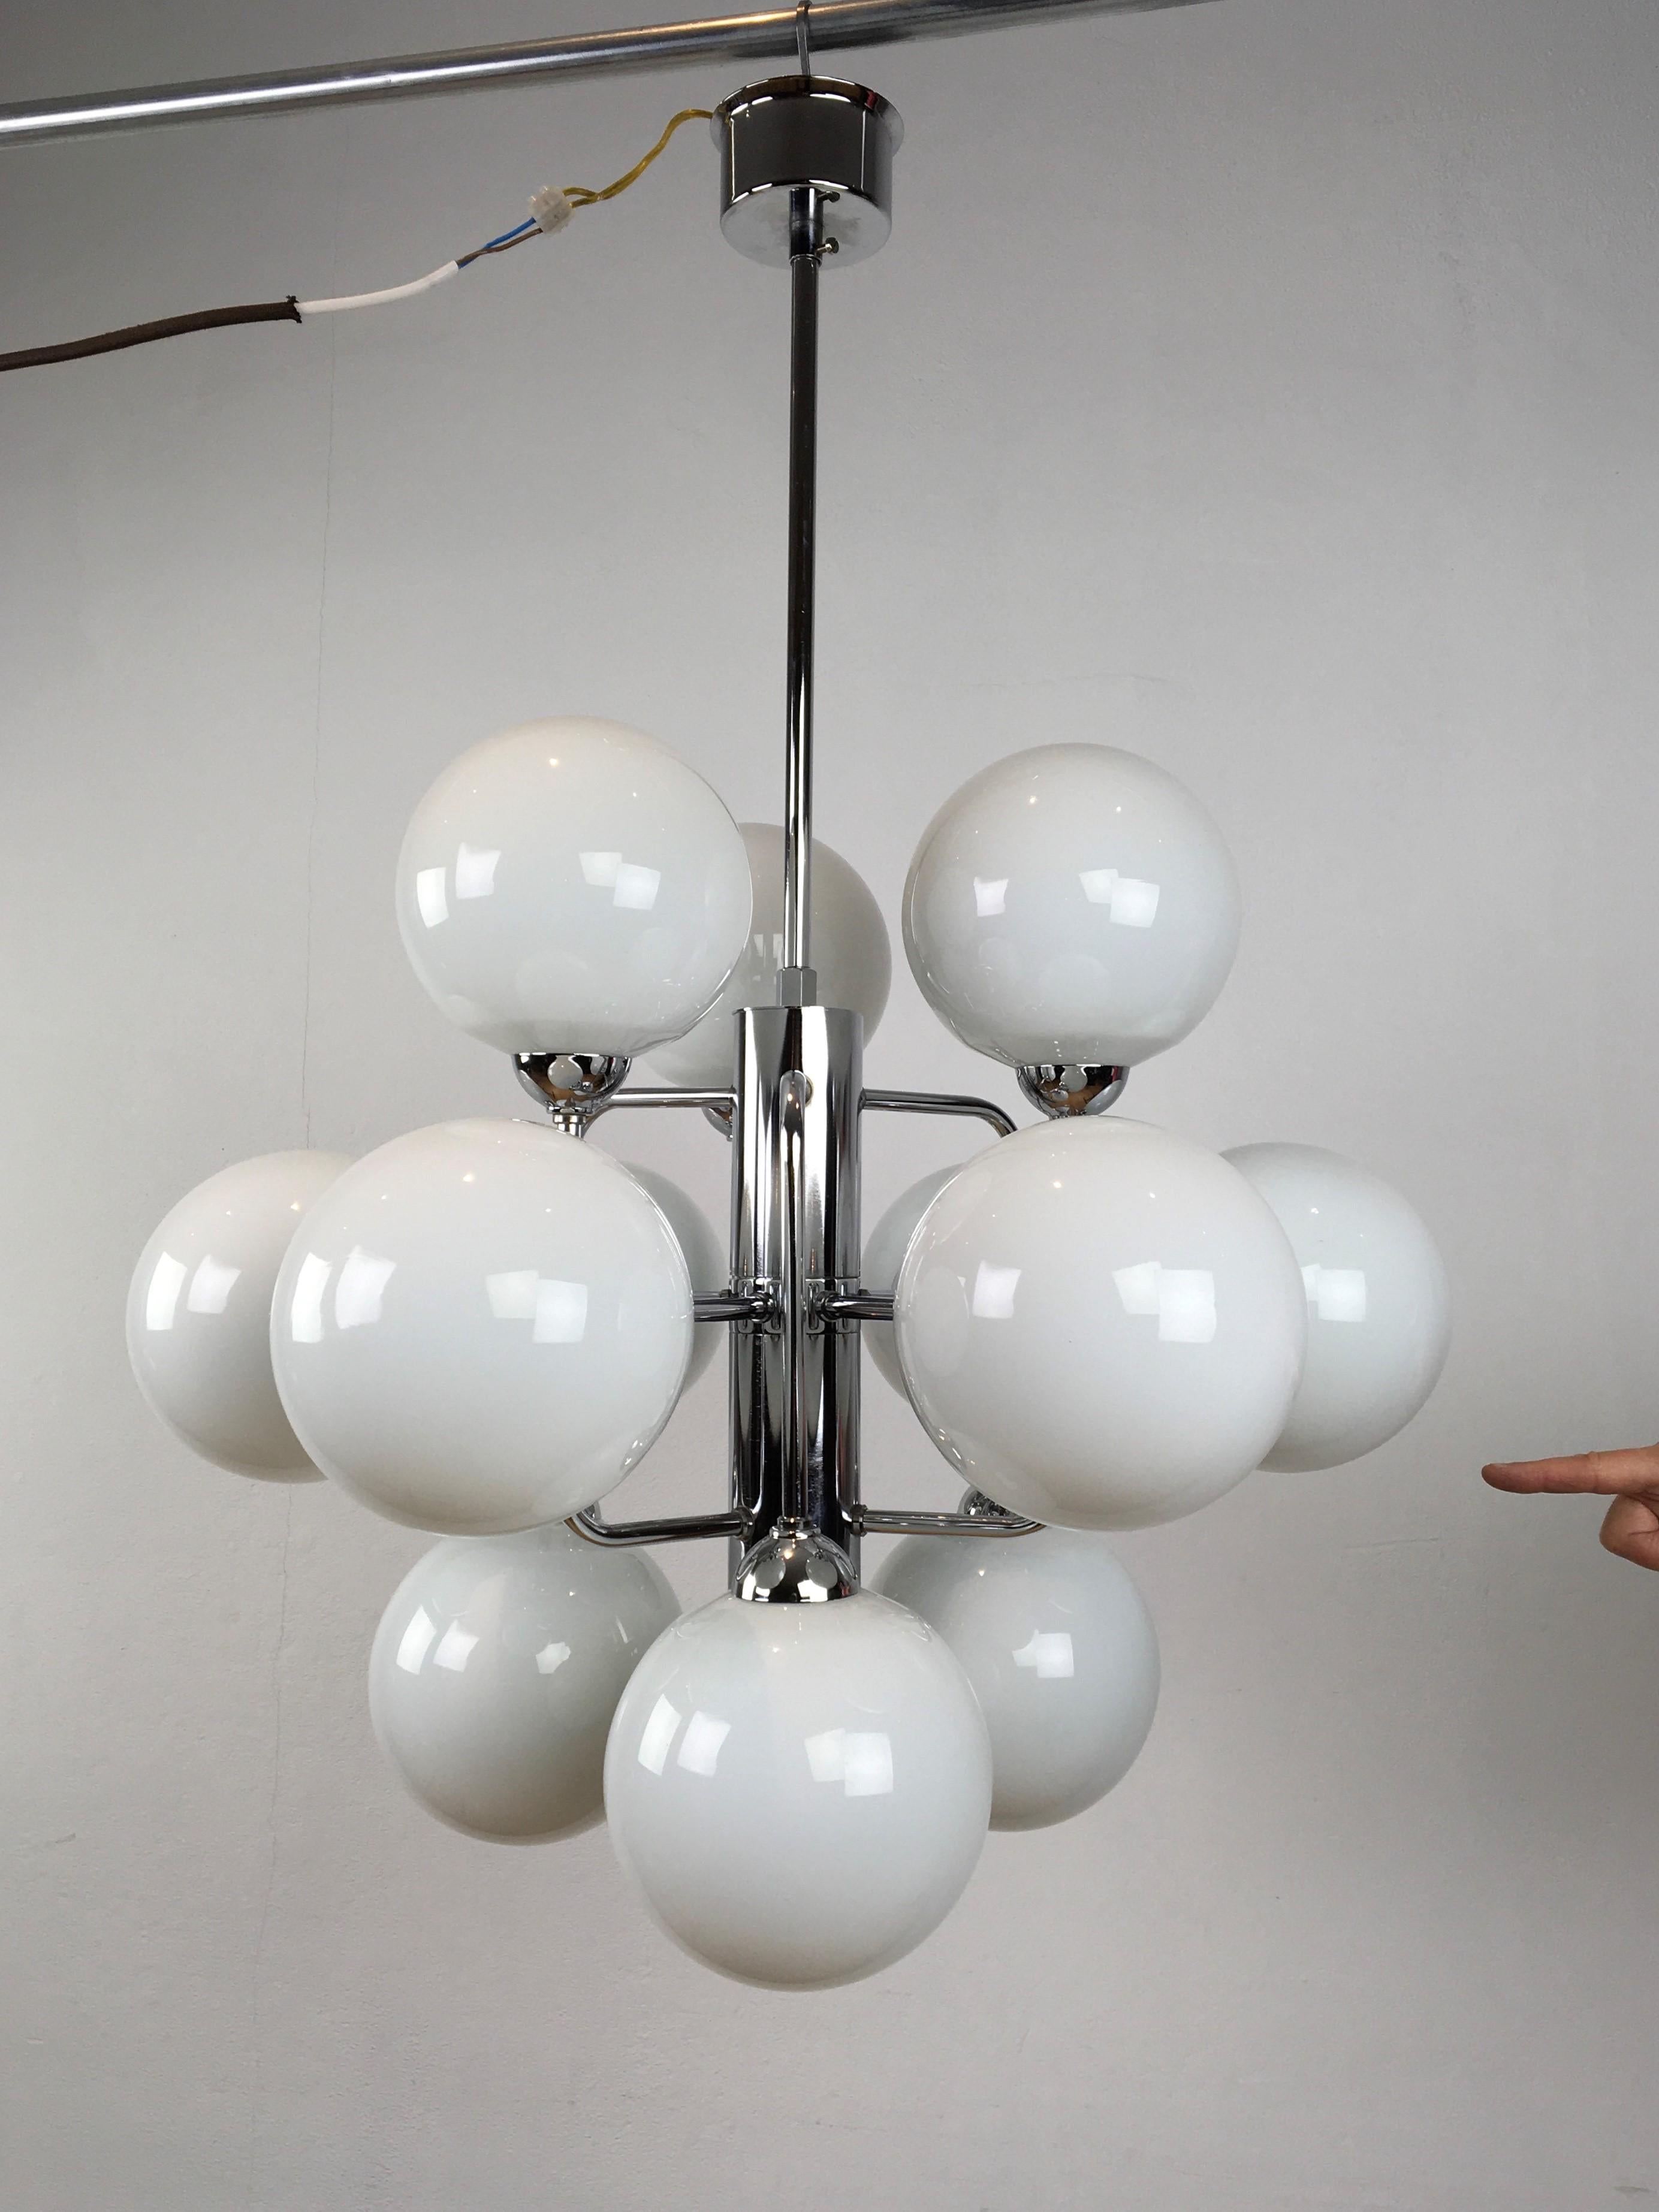 Modern chandelier of chrome with opaline glass globes - Molecular chandelier.
The chrome of this ceiling light is still in beautiful shiny condition. 
It has a kind of cubic chromed frame with 12 handblown opaline glass globes.
This European light